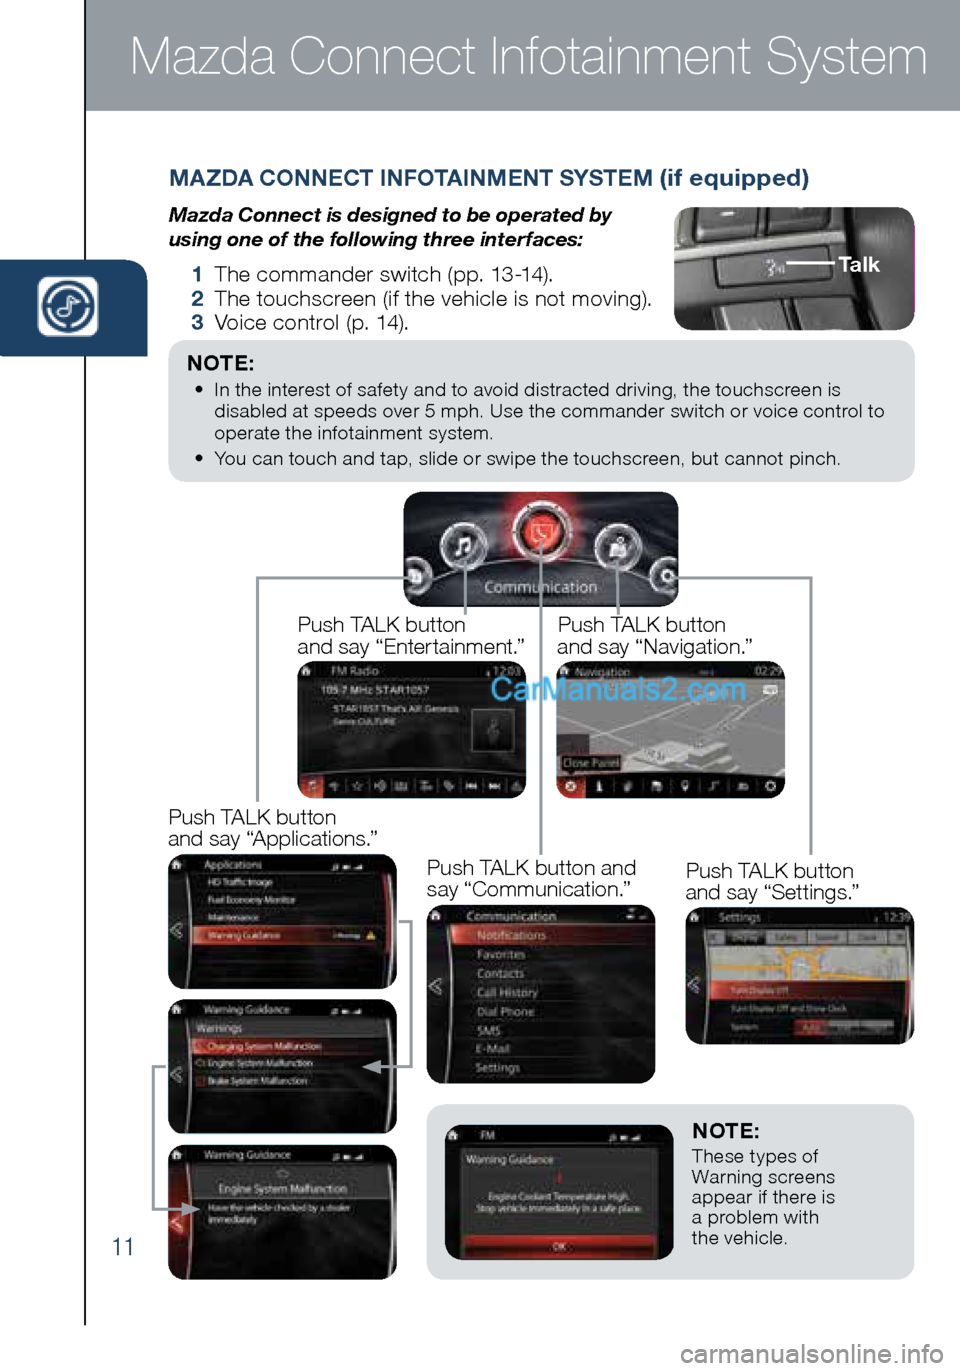 MAZDA MODEL CX-5 2016  Smart Start Guide (in English) 11
MAZDA CONNECT INFOTAINMENT SYSTEM (if equipped)
Mazda Connect is designed to be operated by  
using one of the following three interfaces:
  1 The commander switch (pp. 13-14).
    2 The touchscree